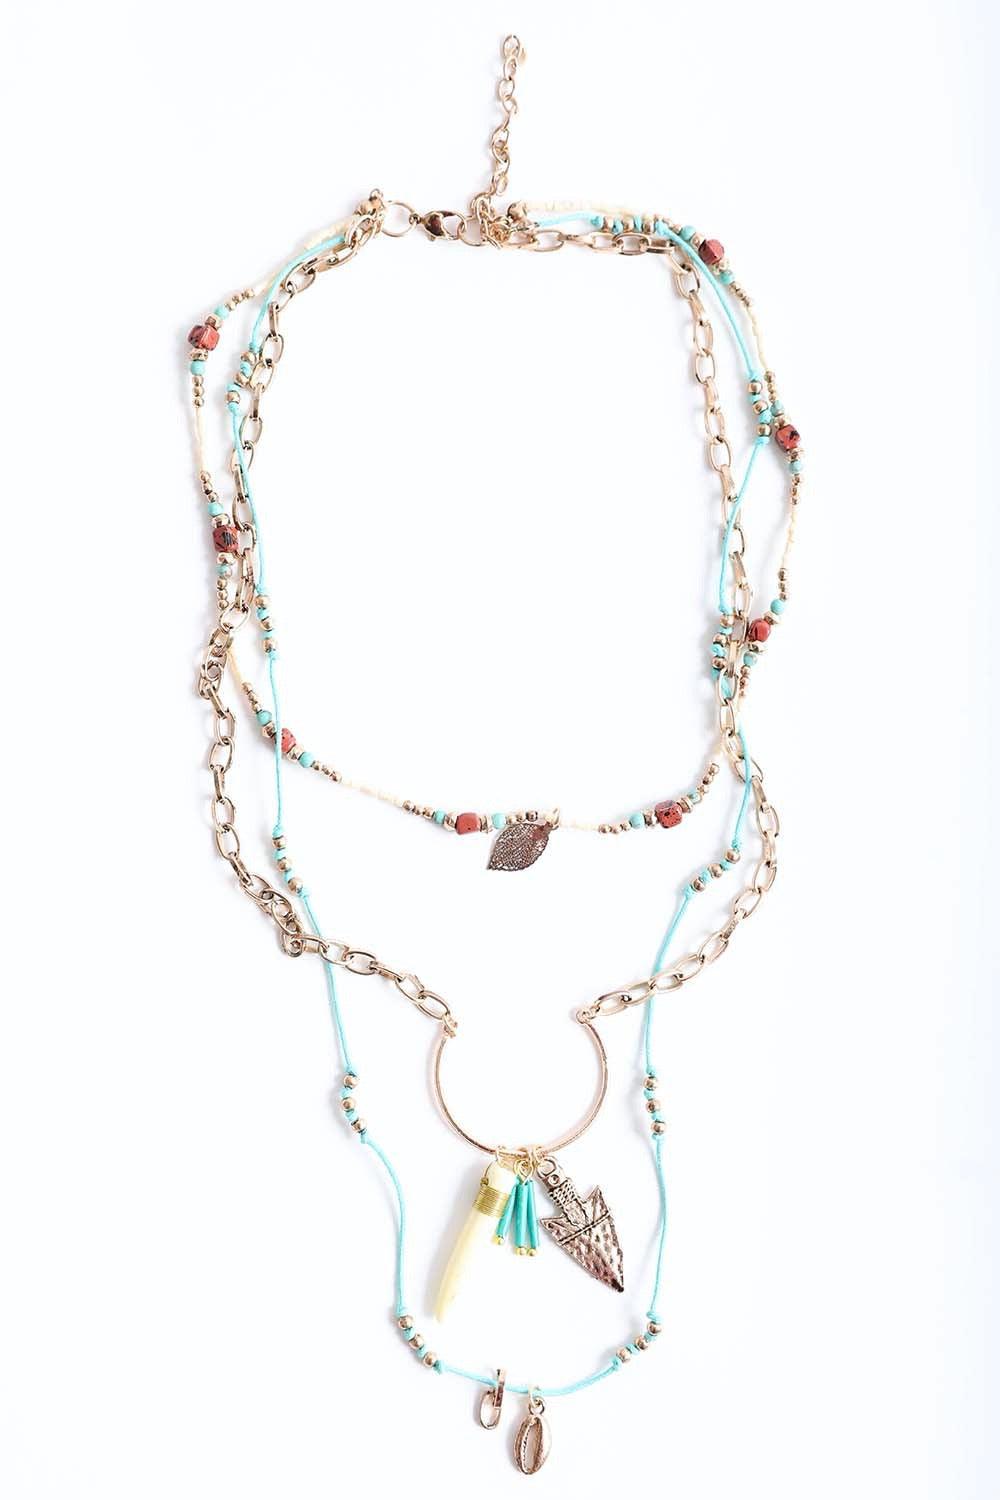 Tusk Horn & Arrow Layered Necklace - Brand My Case